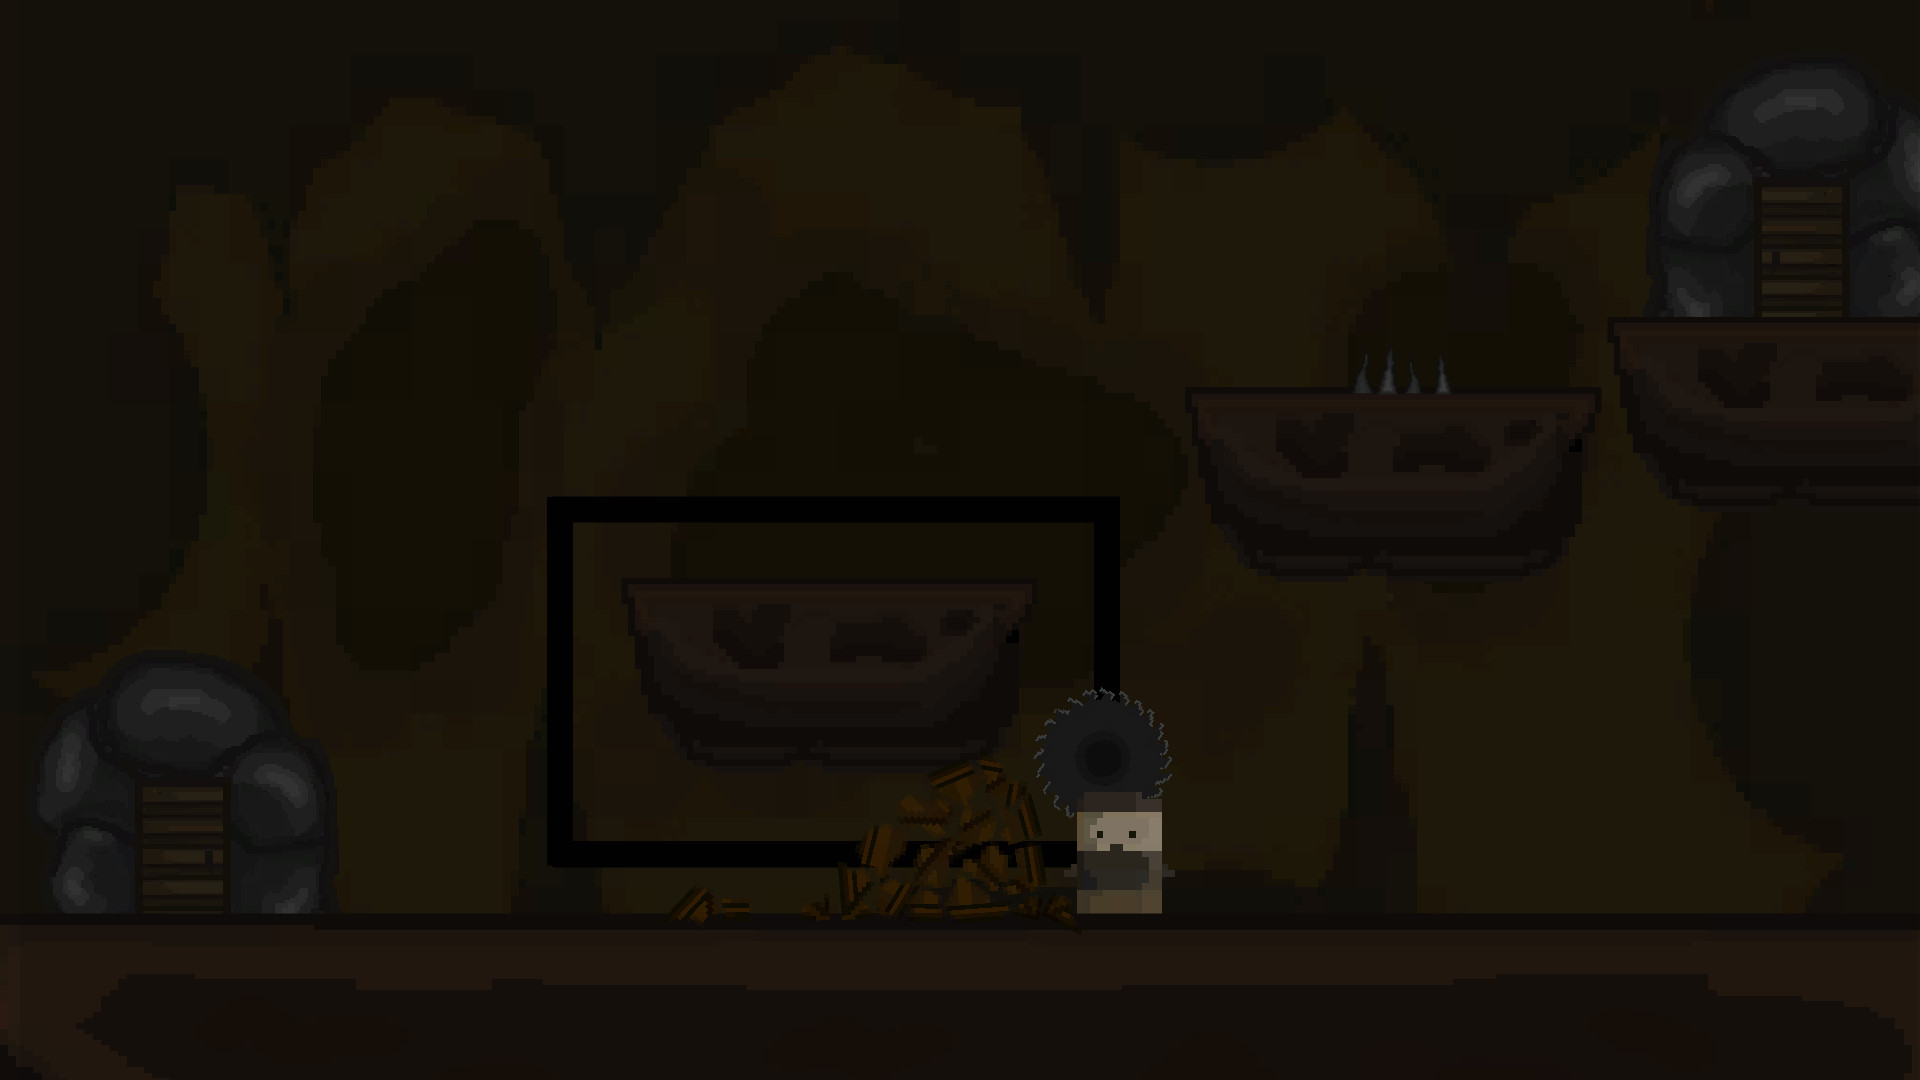 The soldier in the mine screenshot